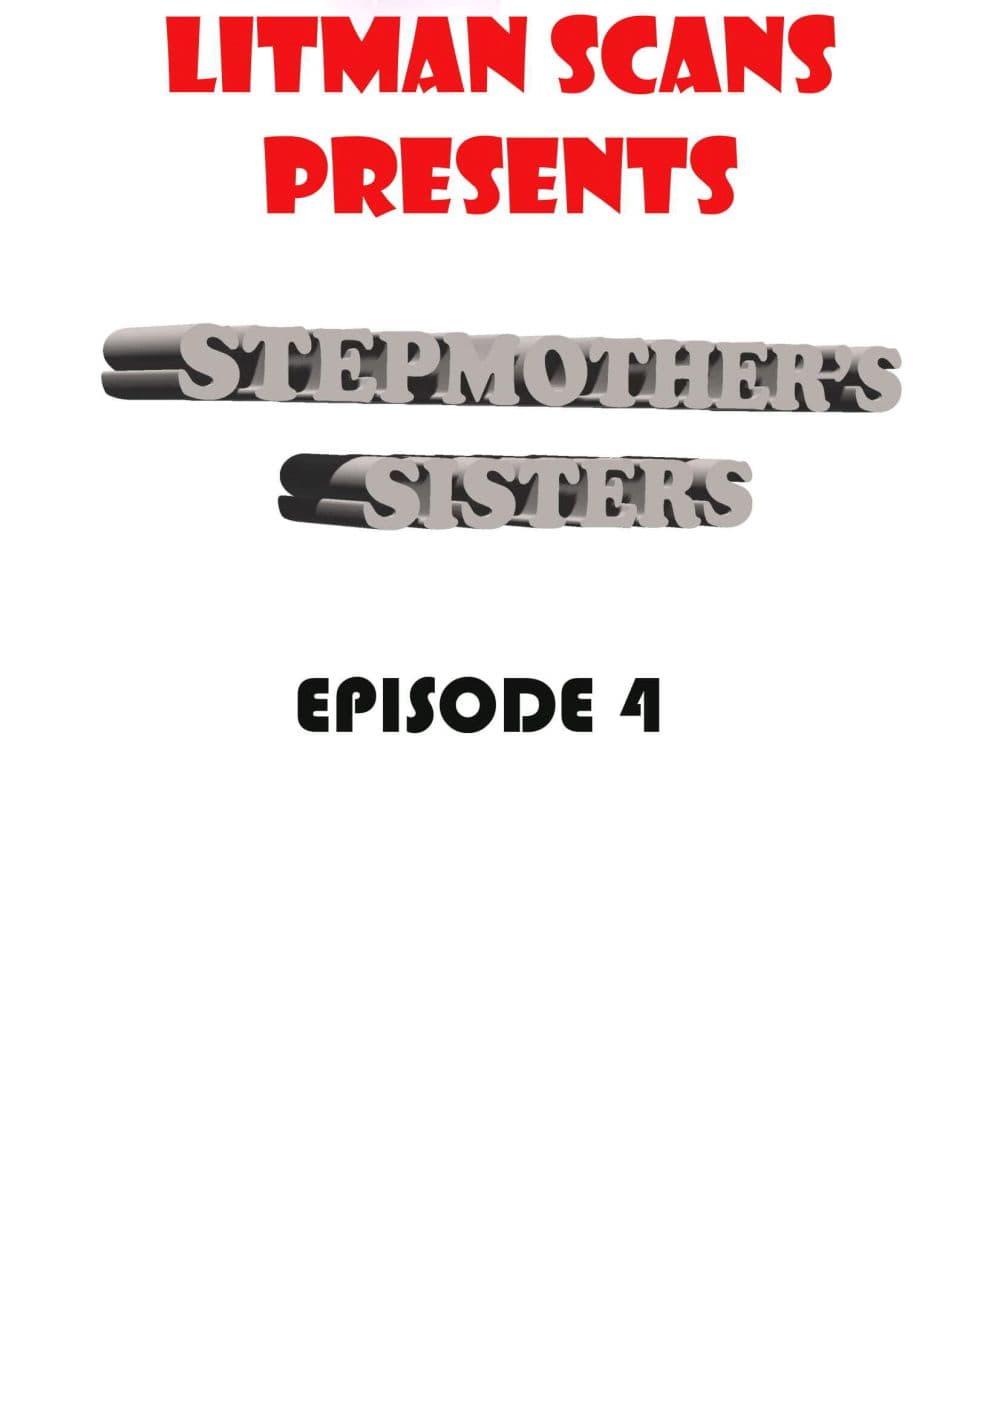 StepmothersSisters 4 (2)